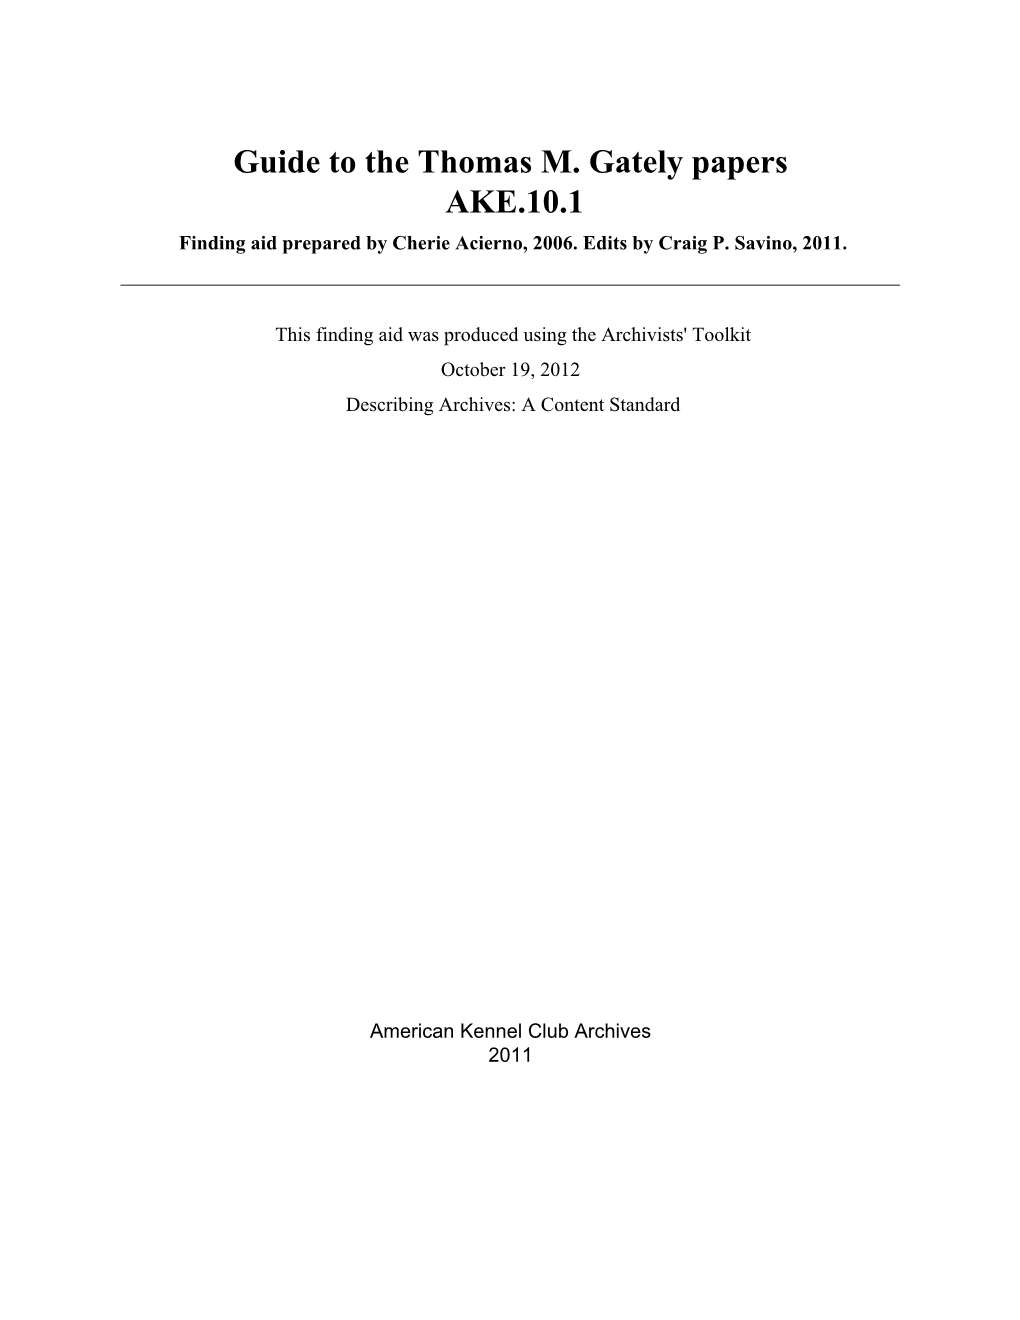 Guide to the Thomas M. Gately Papers AKE.10.1 Finding Aid Prepared by Cherie Acierno, 2006